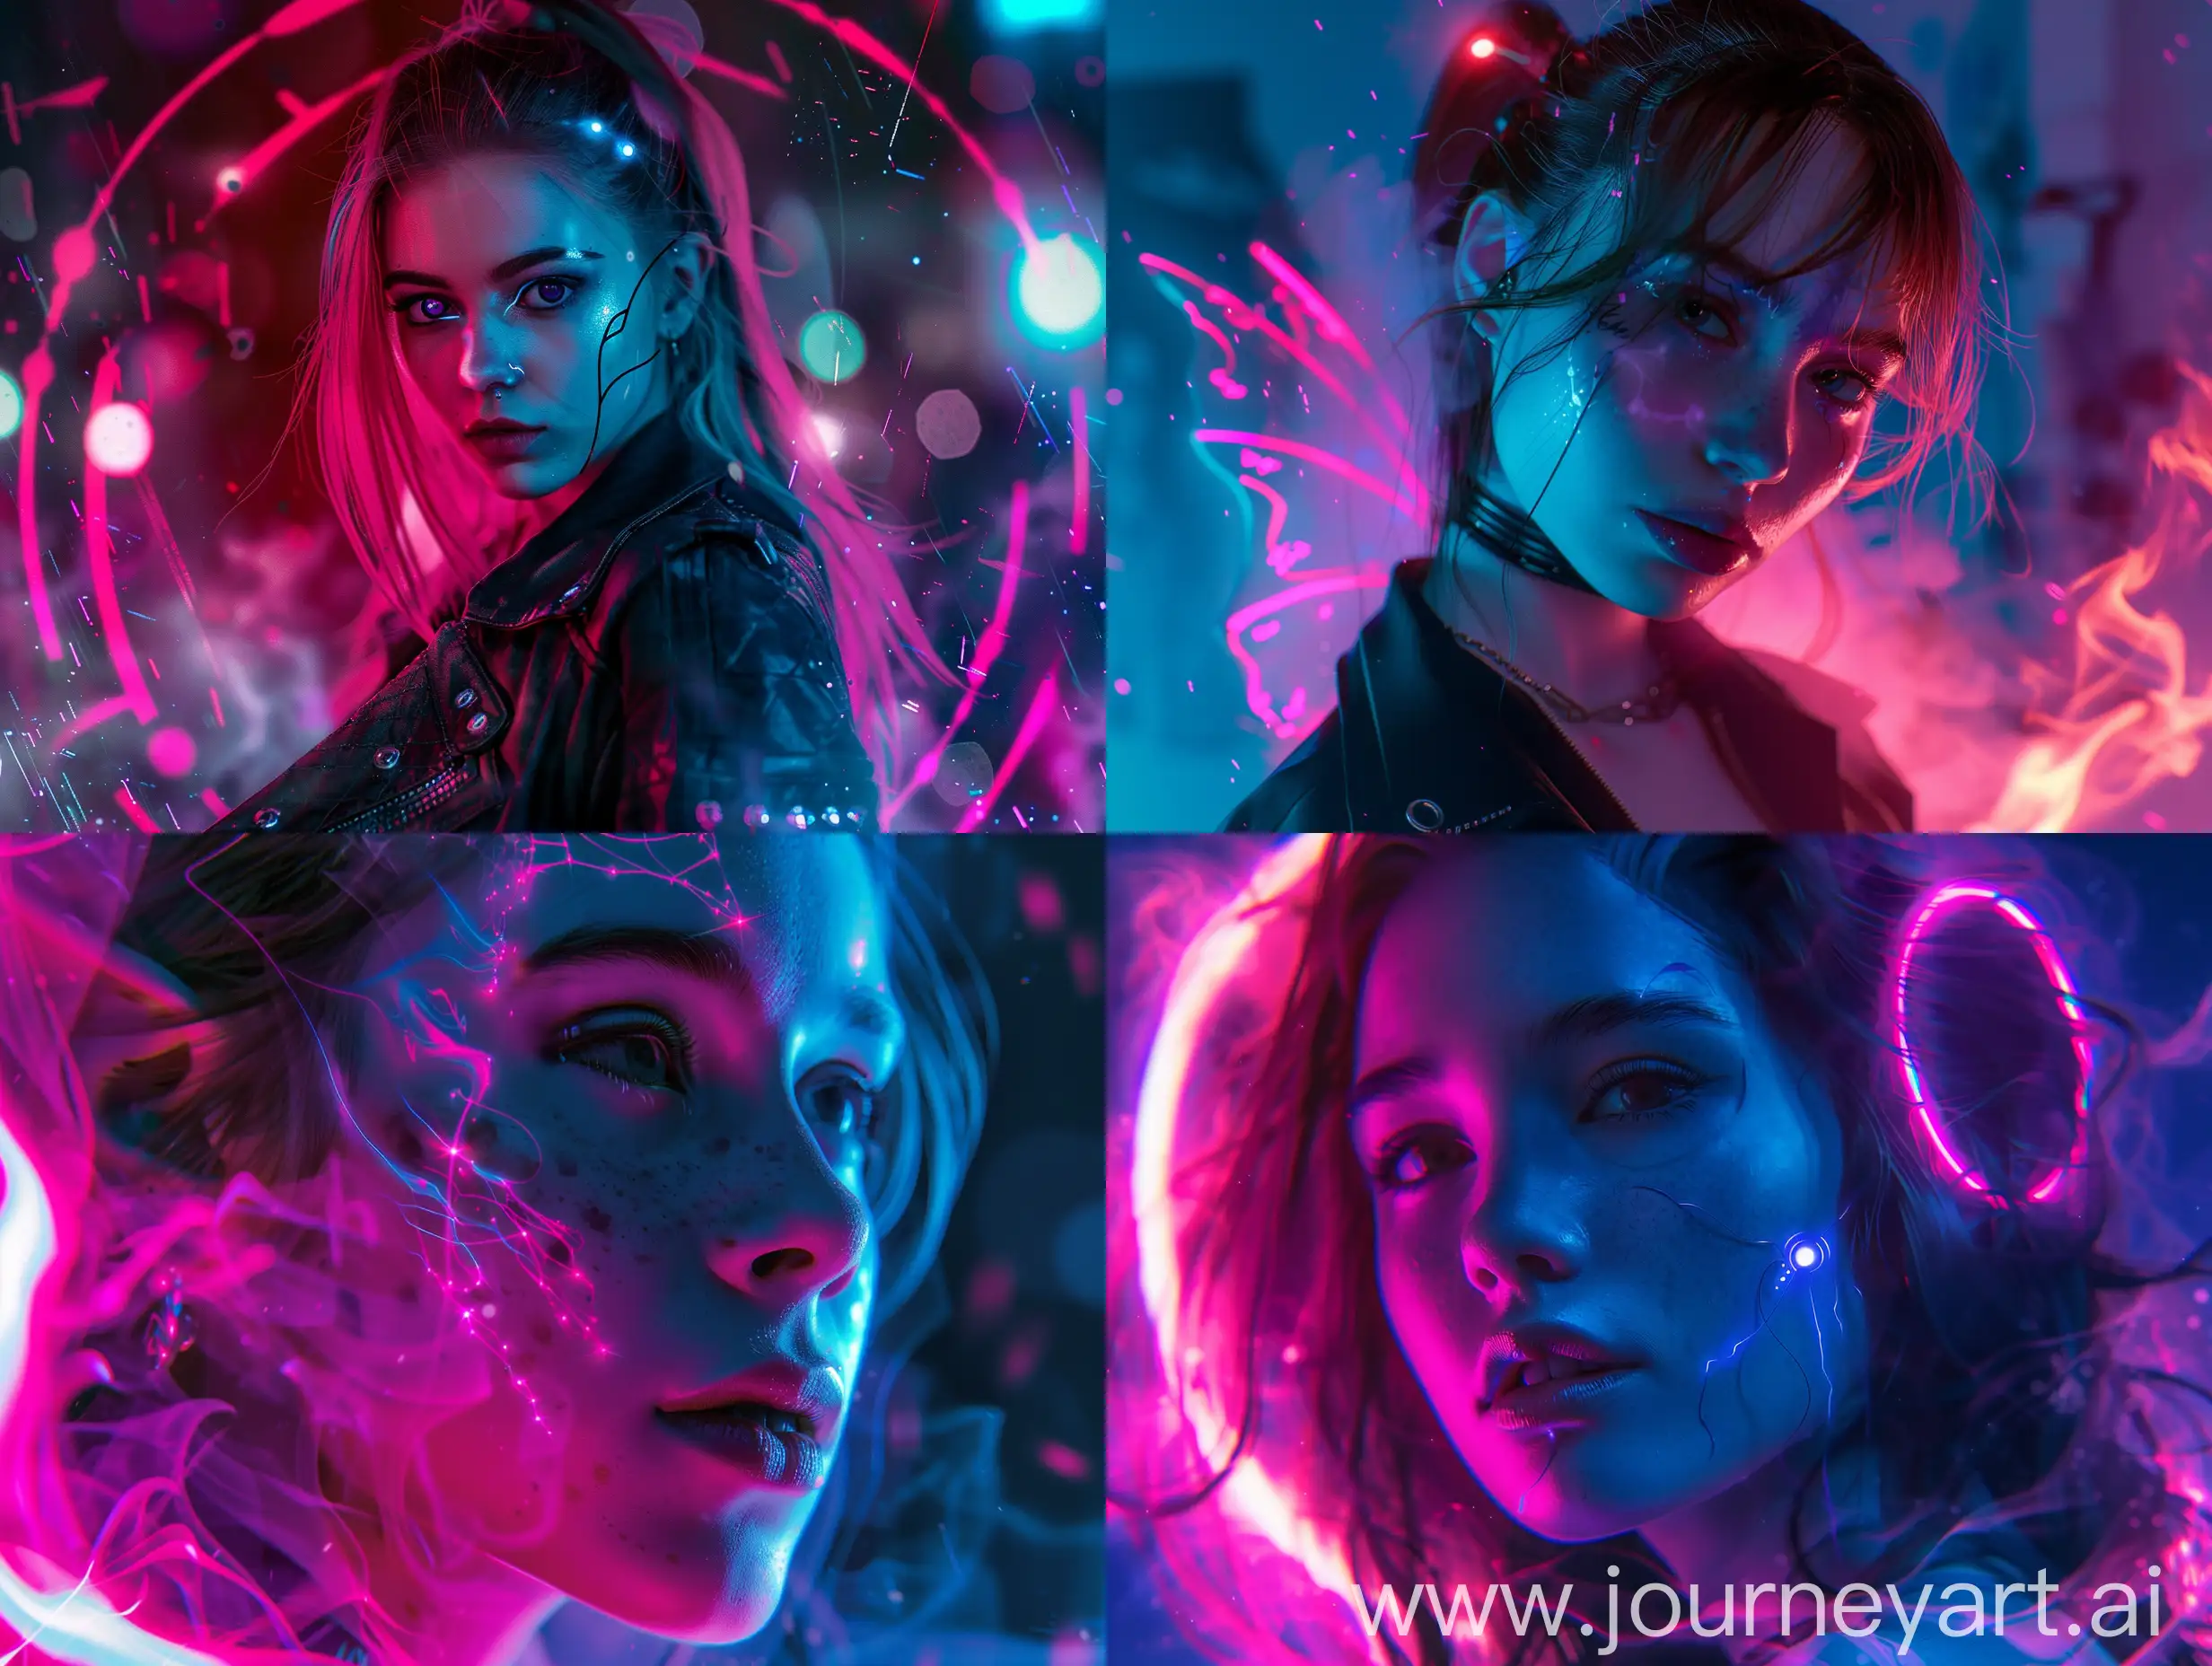 woman, 1girl, beautiful, darkness, potrait,  with subtle pink and blue gradients, realistic, high detail, attractive, fit, pretty face, cyberpunk fantasy, futuristic fairy psychedelic tale, robotic lasers fairy dancing rave in an neon incandescent flame, moonlight enveloping attire tech-punk mech-punk cityscape